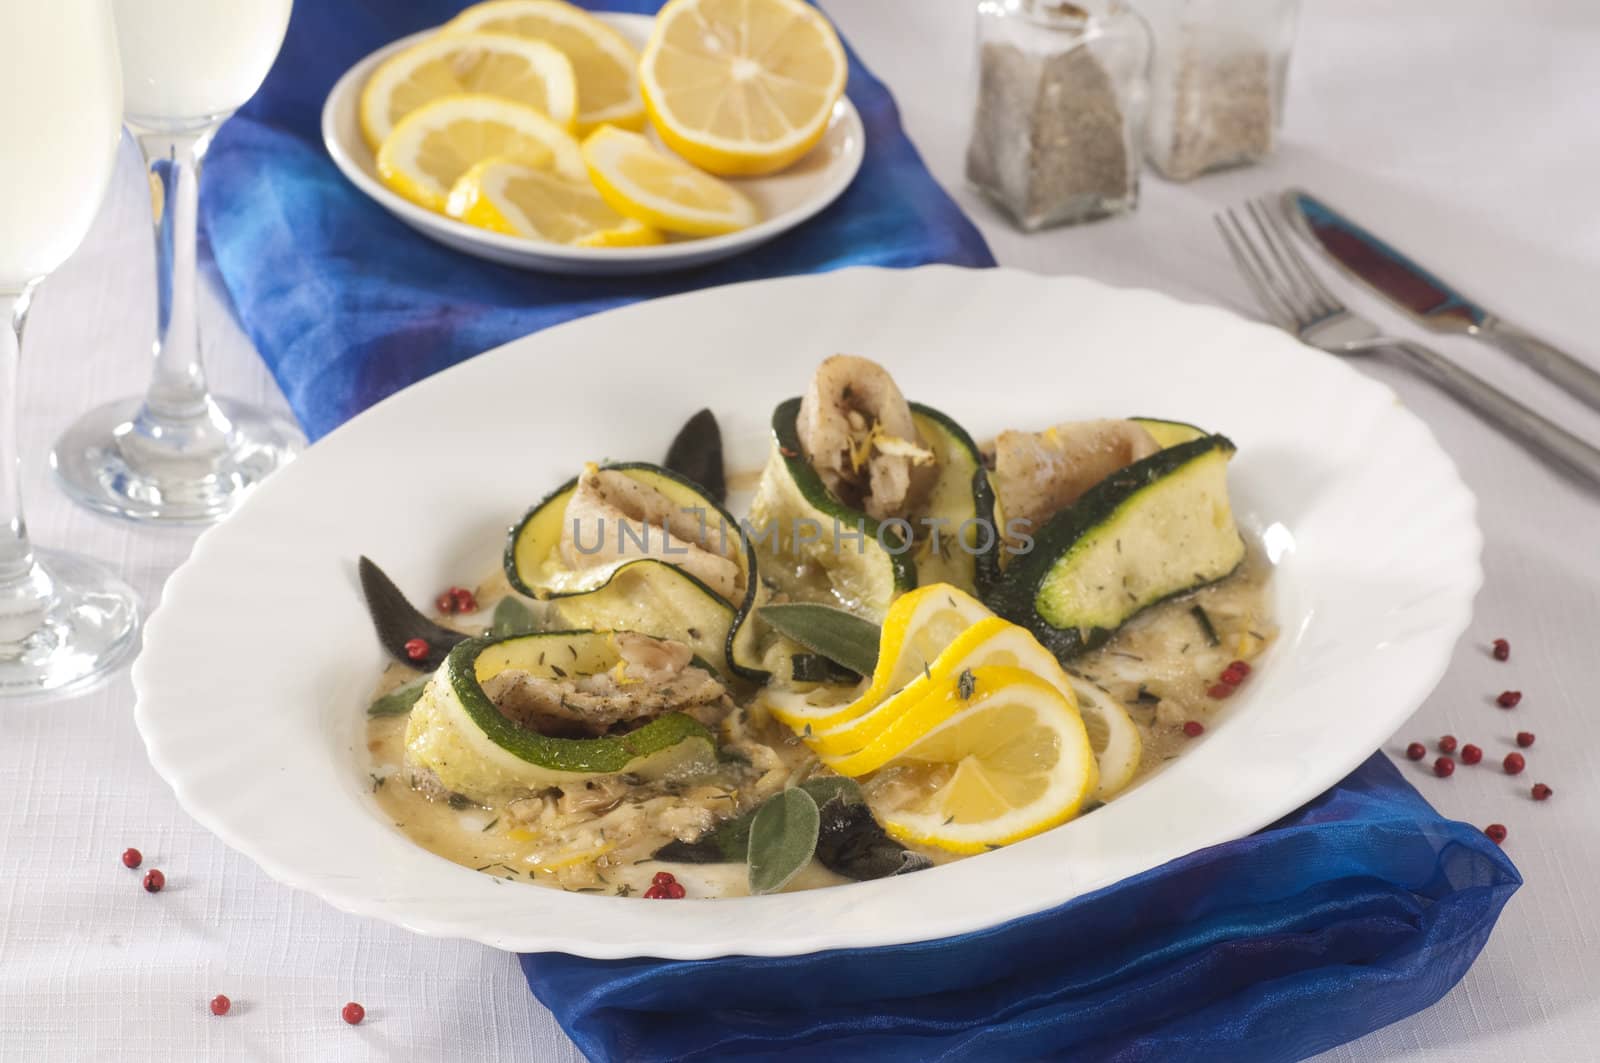 Fish cutlet with zucchini and orange